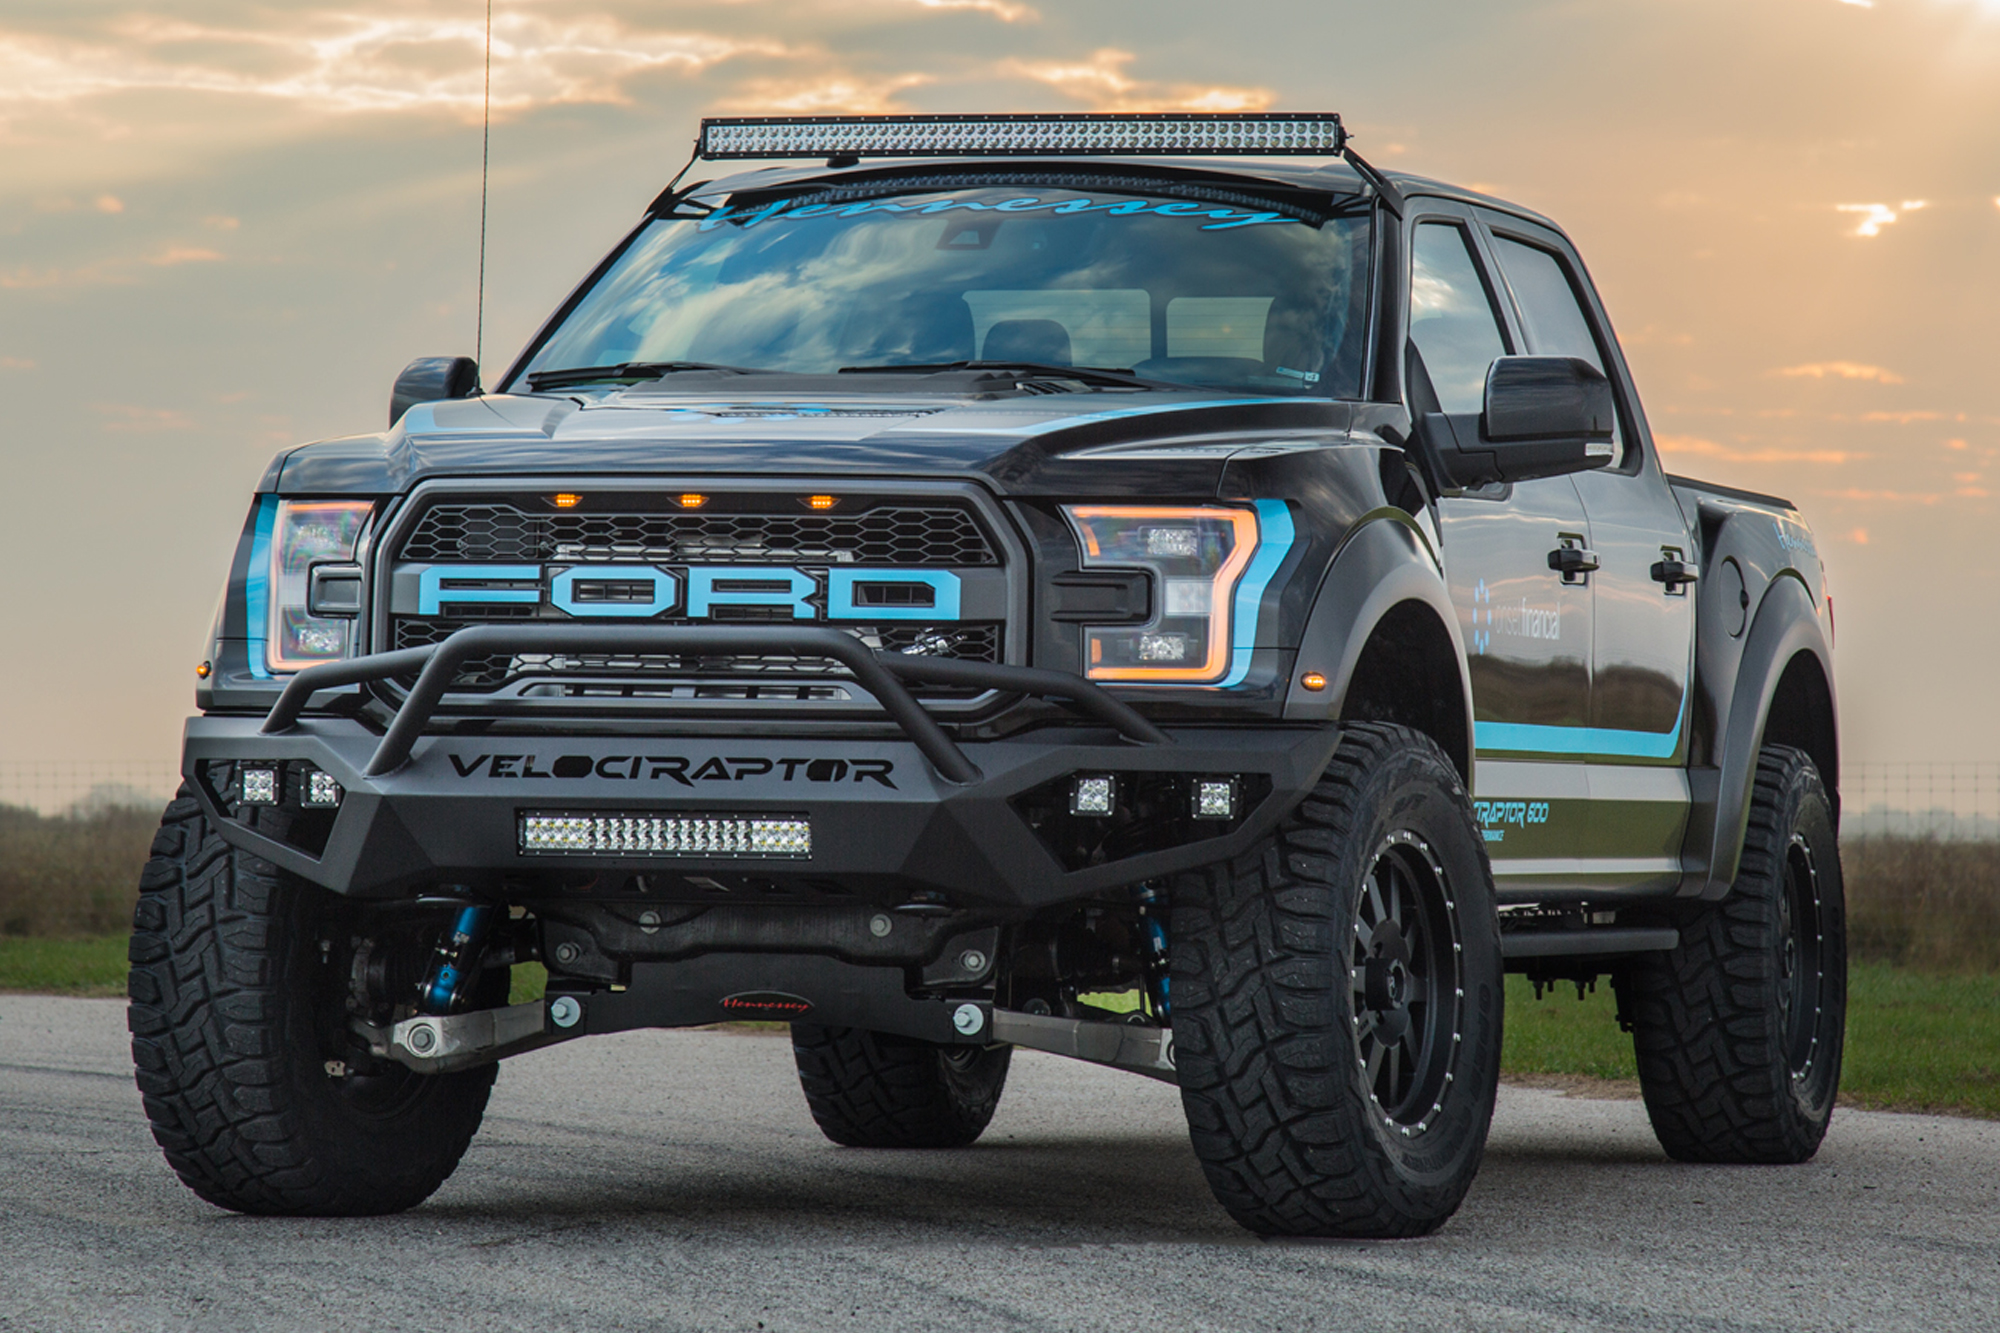 2017 - 2018 Ford Raptor F-150 Pick-up Truck | Hennessey Performance